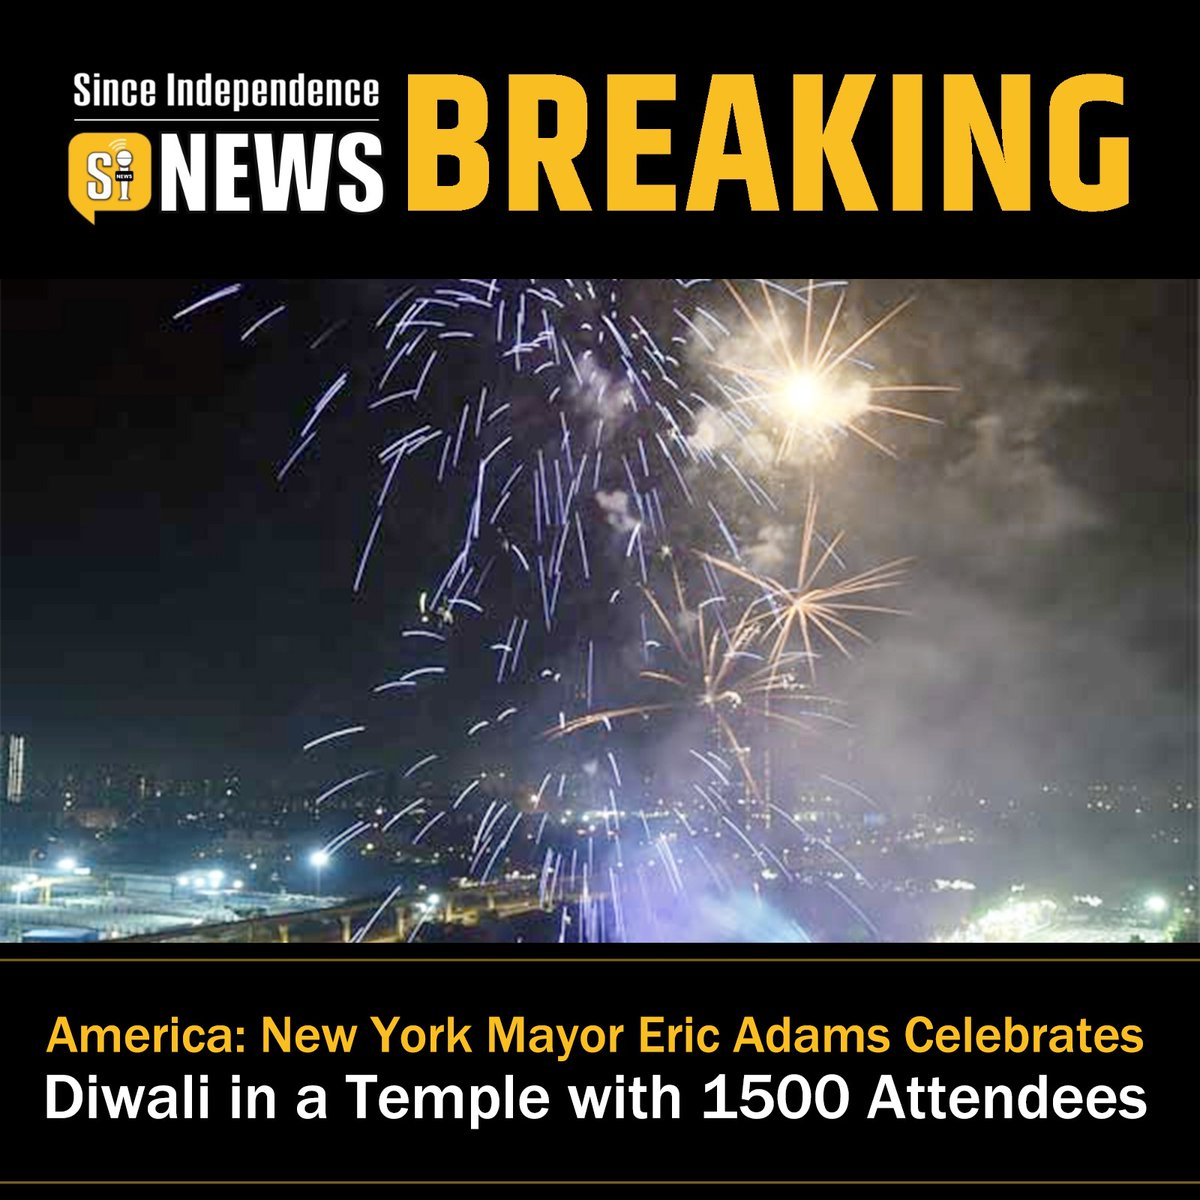 America: New York Mayor Eric Adams Celebrates Diwali in a Temple with 1500 Attendees | Since Independence News
#America #NewYorkMayor #EricAdams #CelebratesDiwali #Temple #PoliticsToday #BadiKhabar #SpecialReport #BreakingNews #SinceIndependence